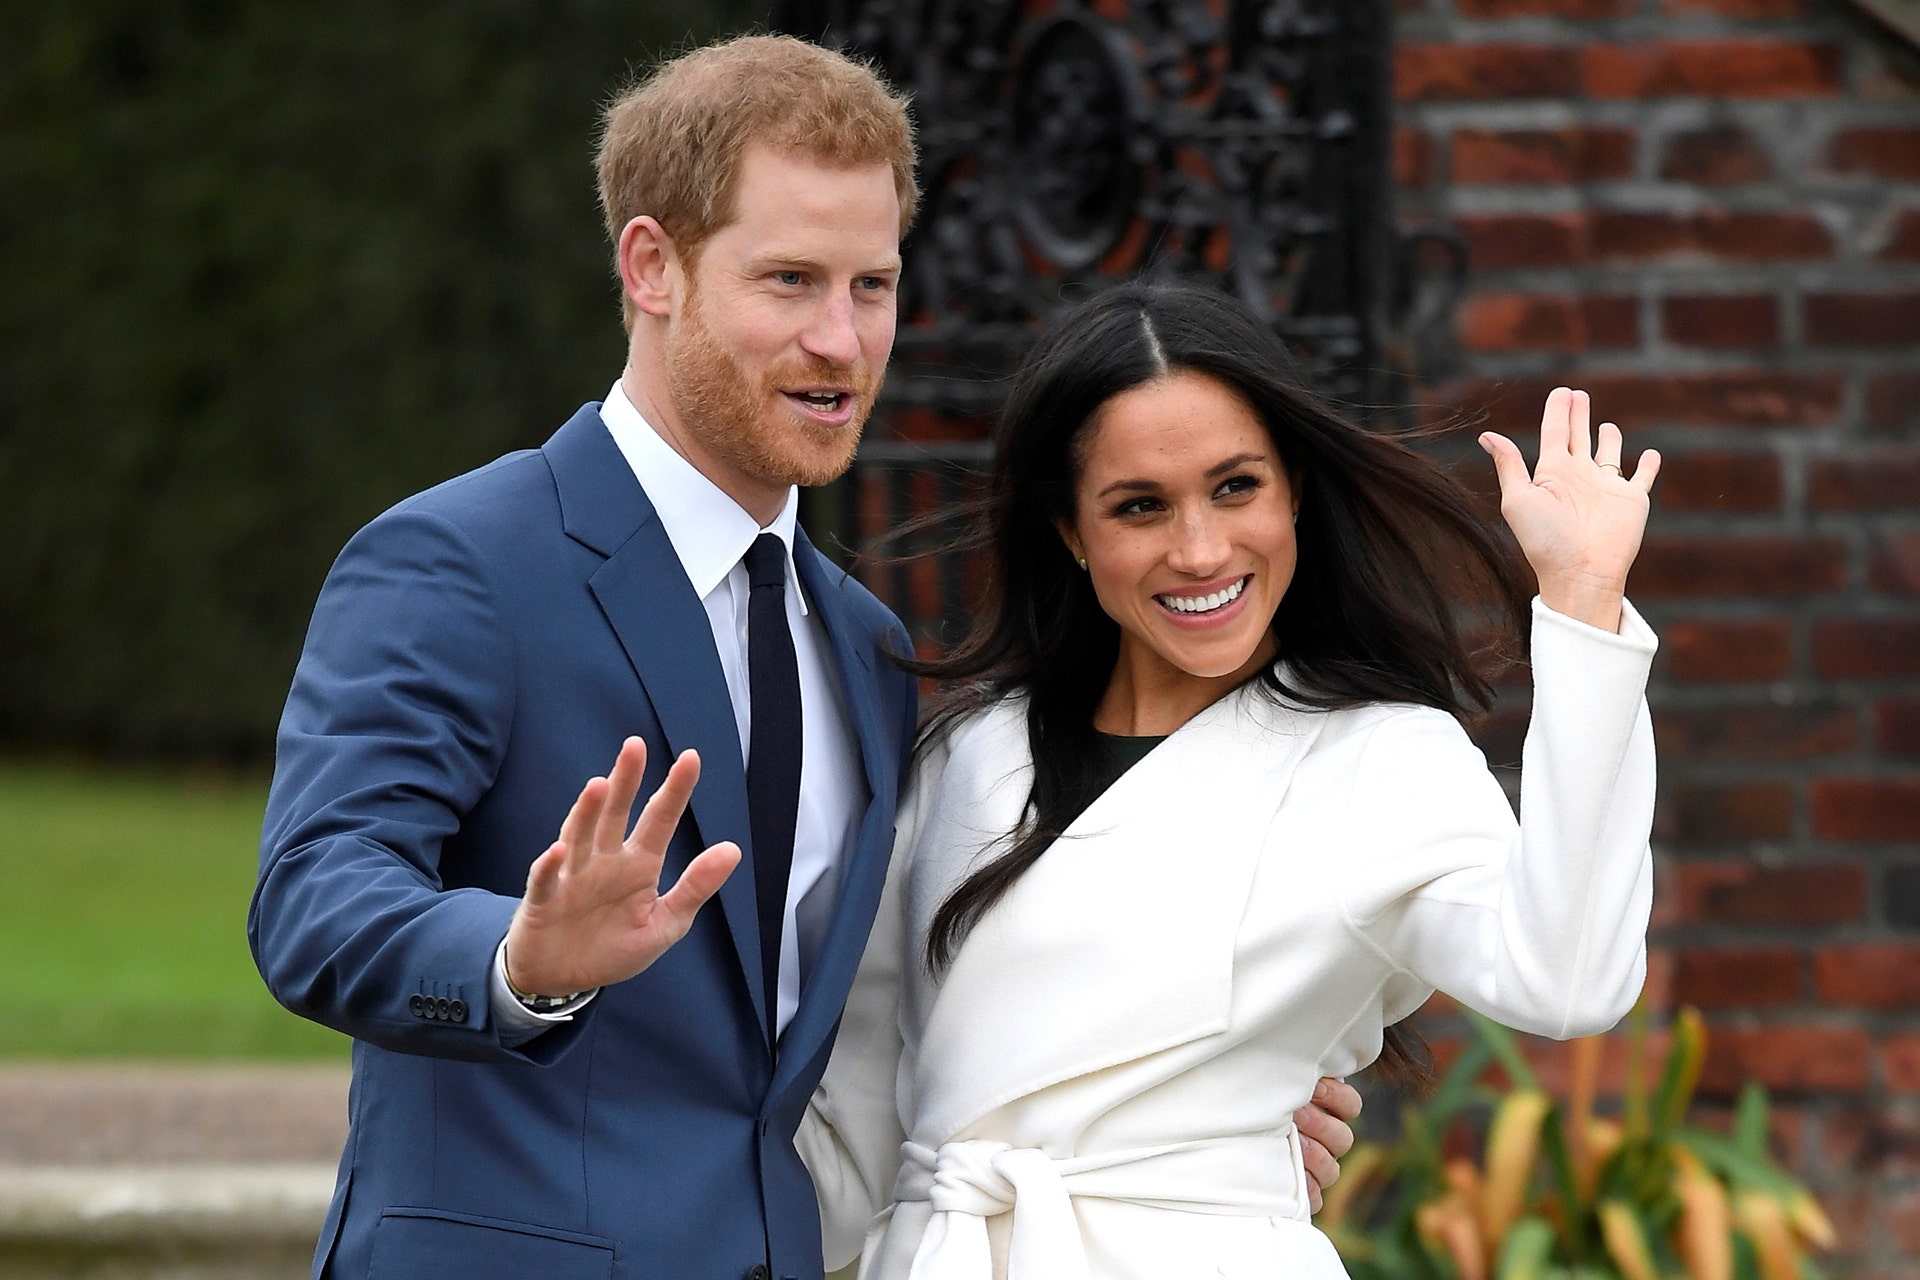 Meghan Markle, Prince Harry didn't consult with palace courtiers before agreeing to Oprah interview: source